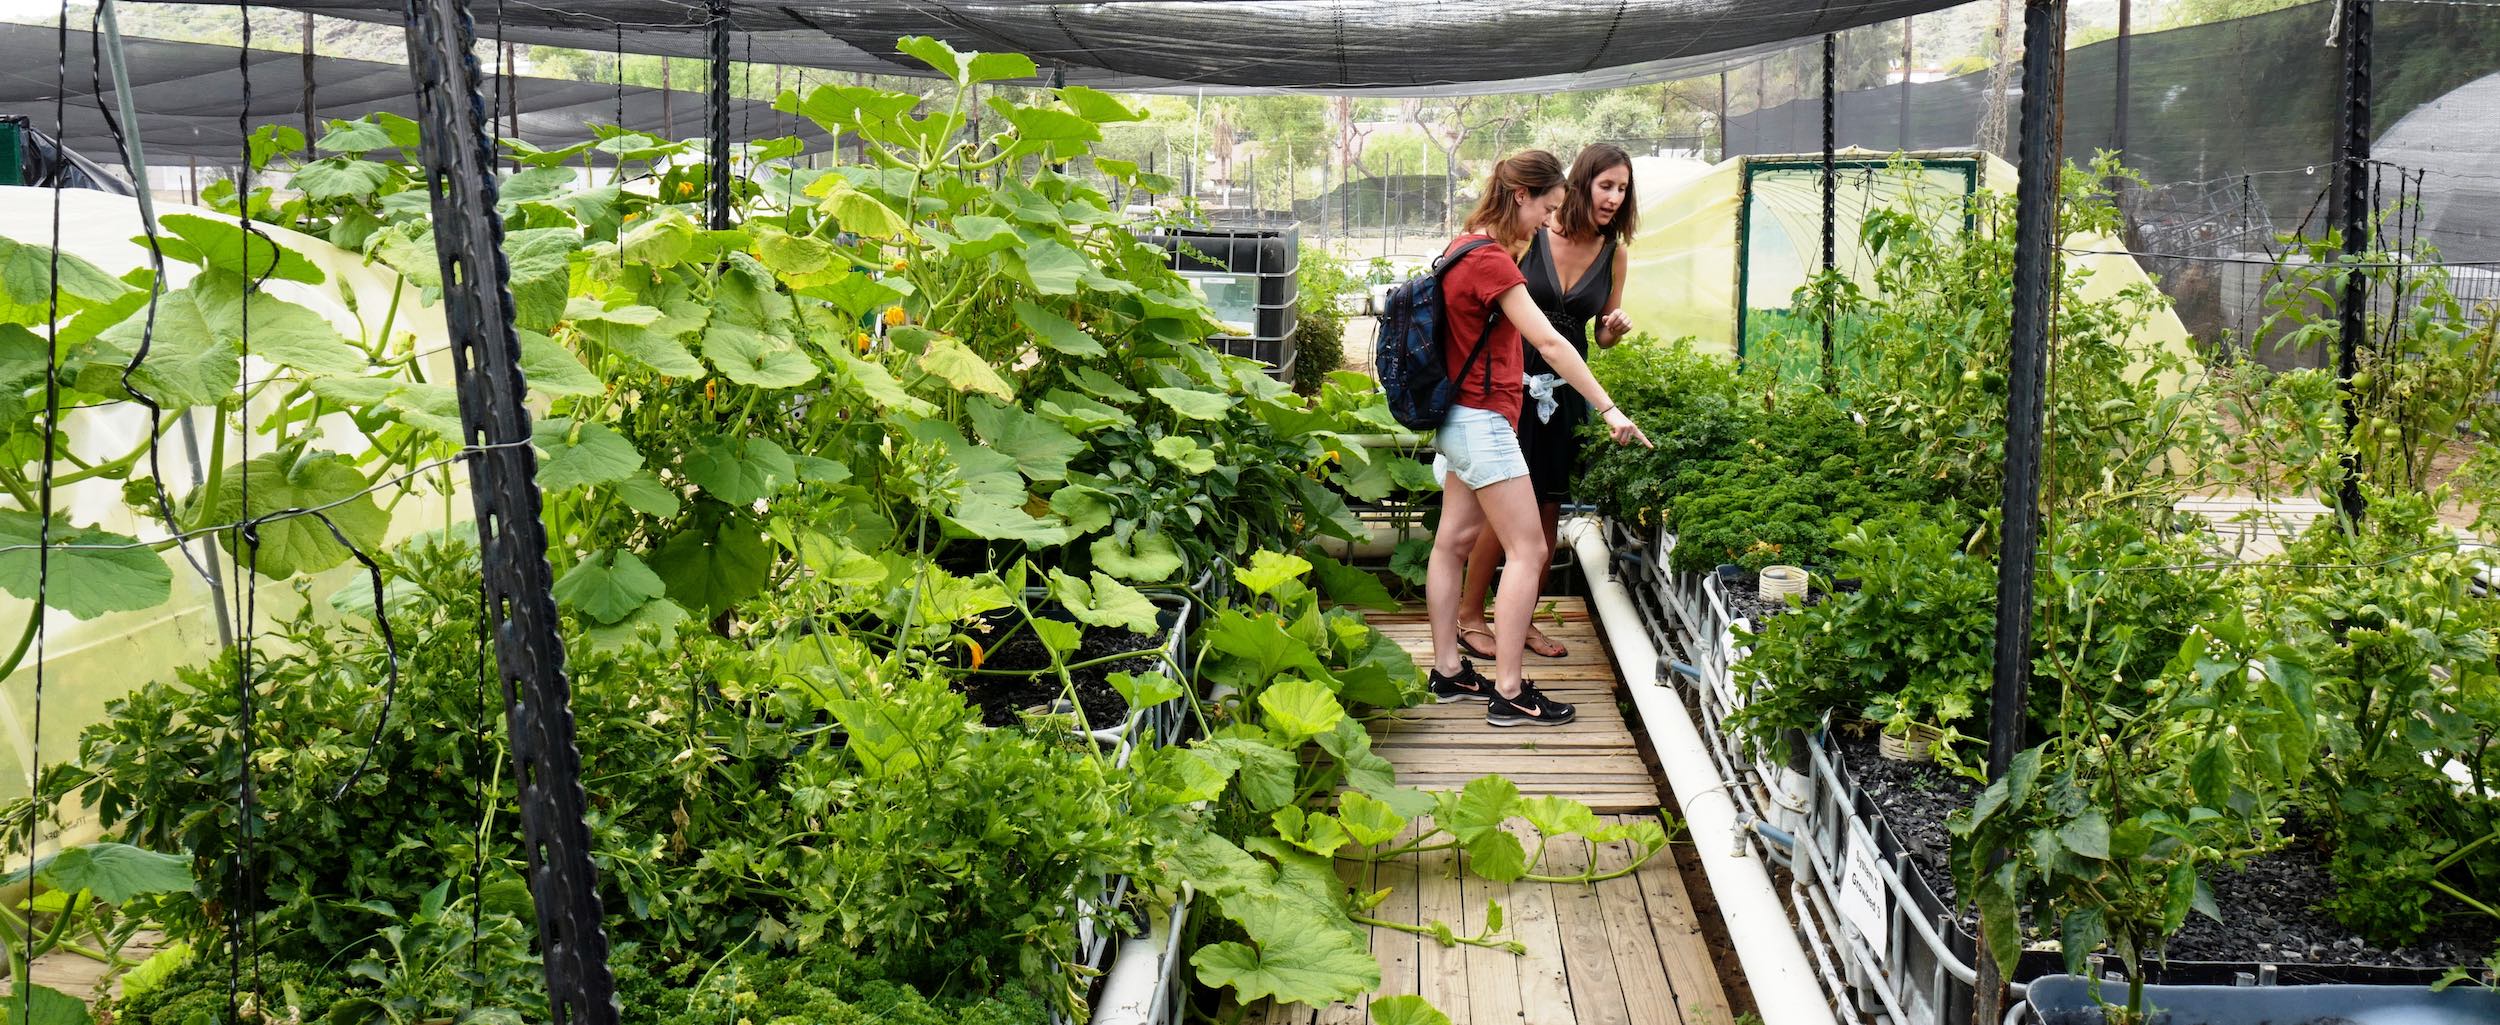 Two women inside a greenhouse packed with plants.